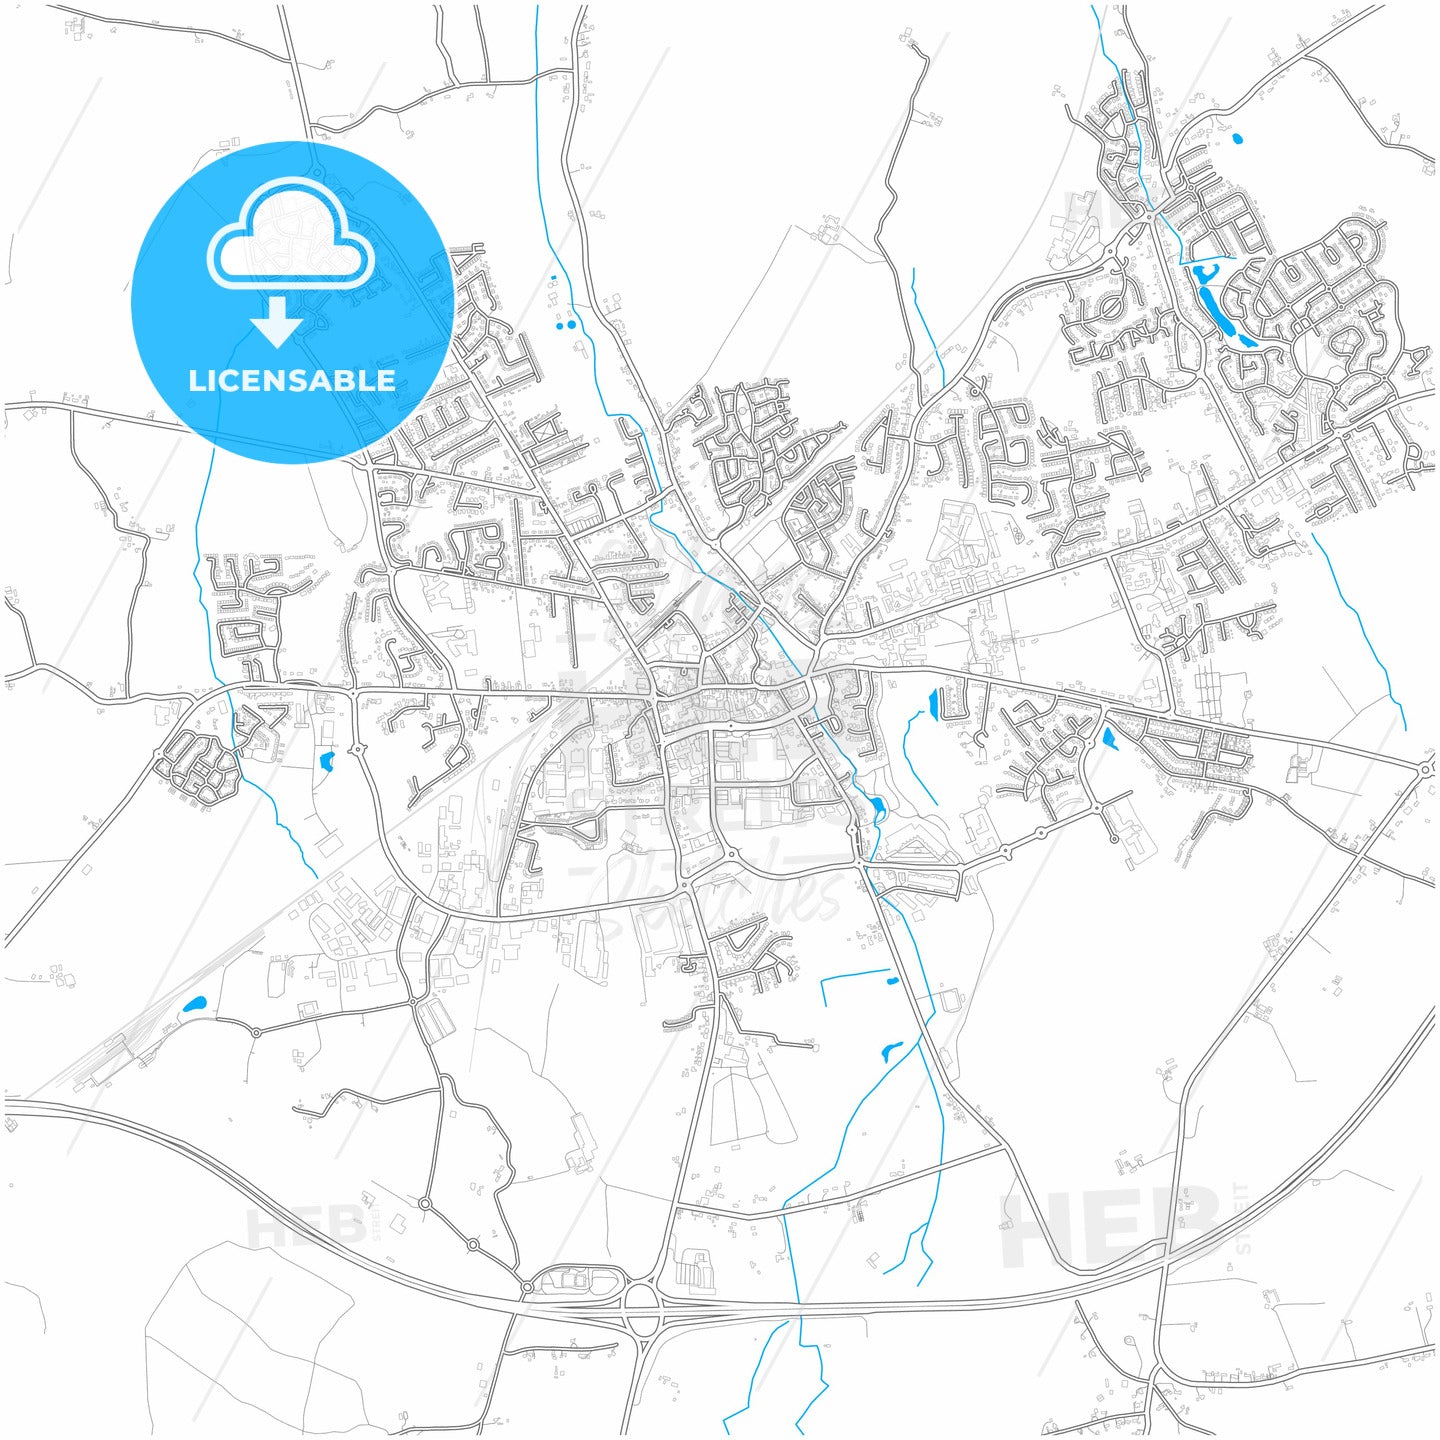 Port Laoise, County Laois, Ireland, city map with high quality roads.